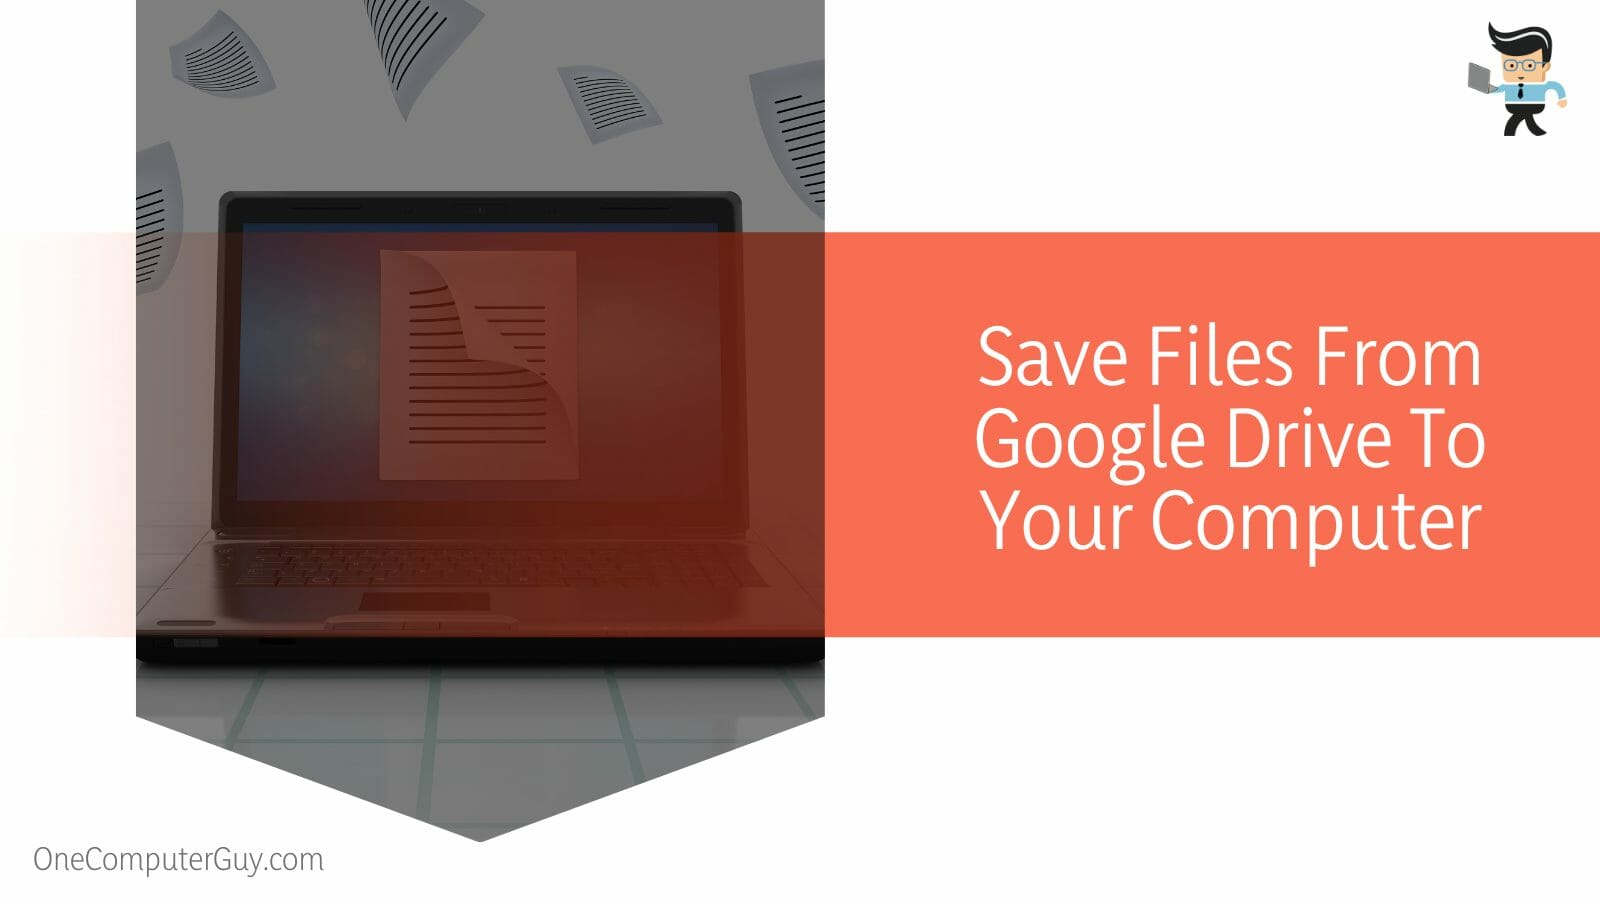 Save Files From Google Drive To Your Computer